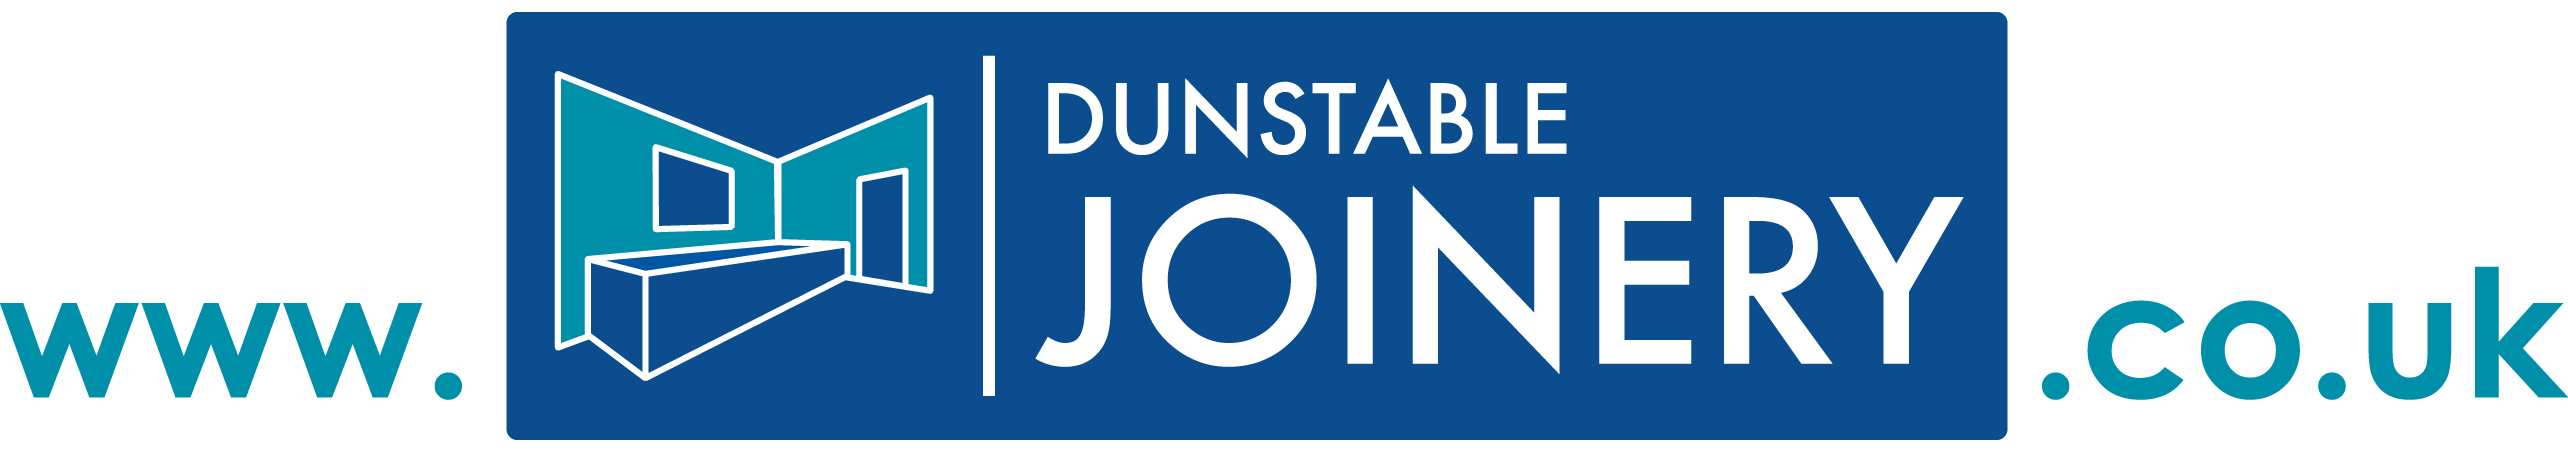 Dunstable Joinery logo